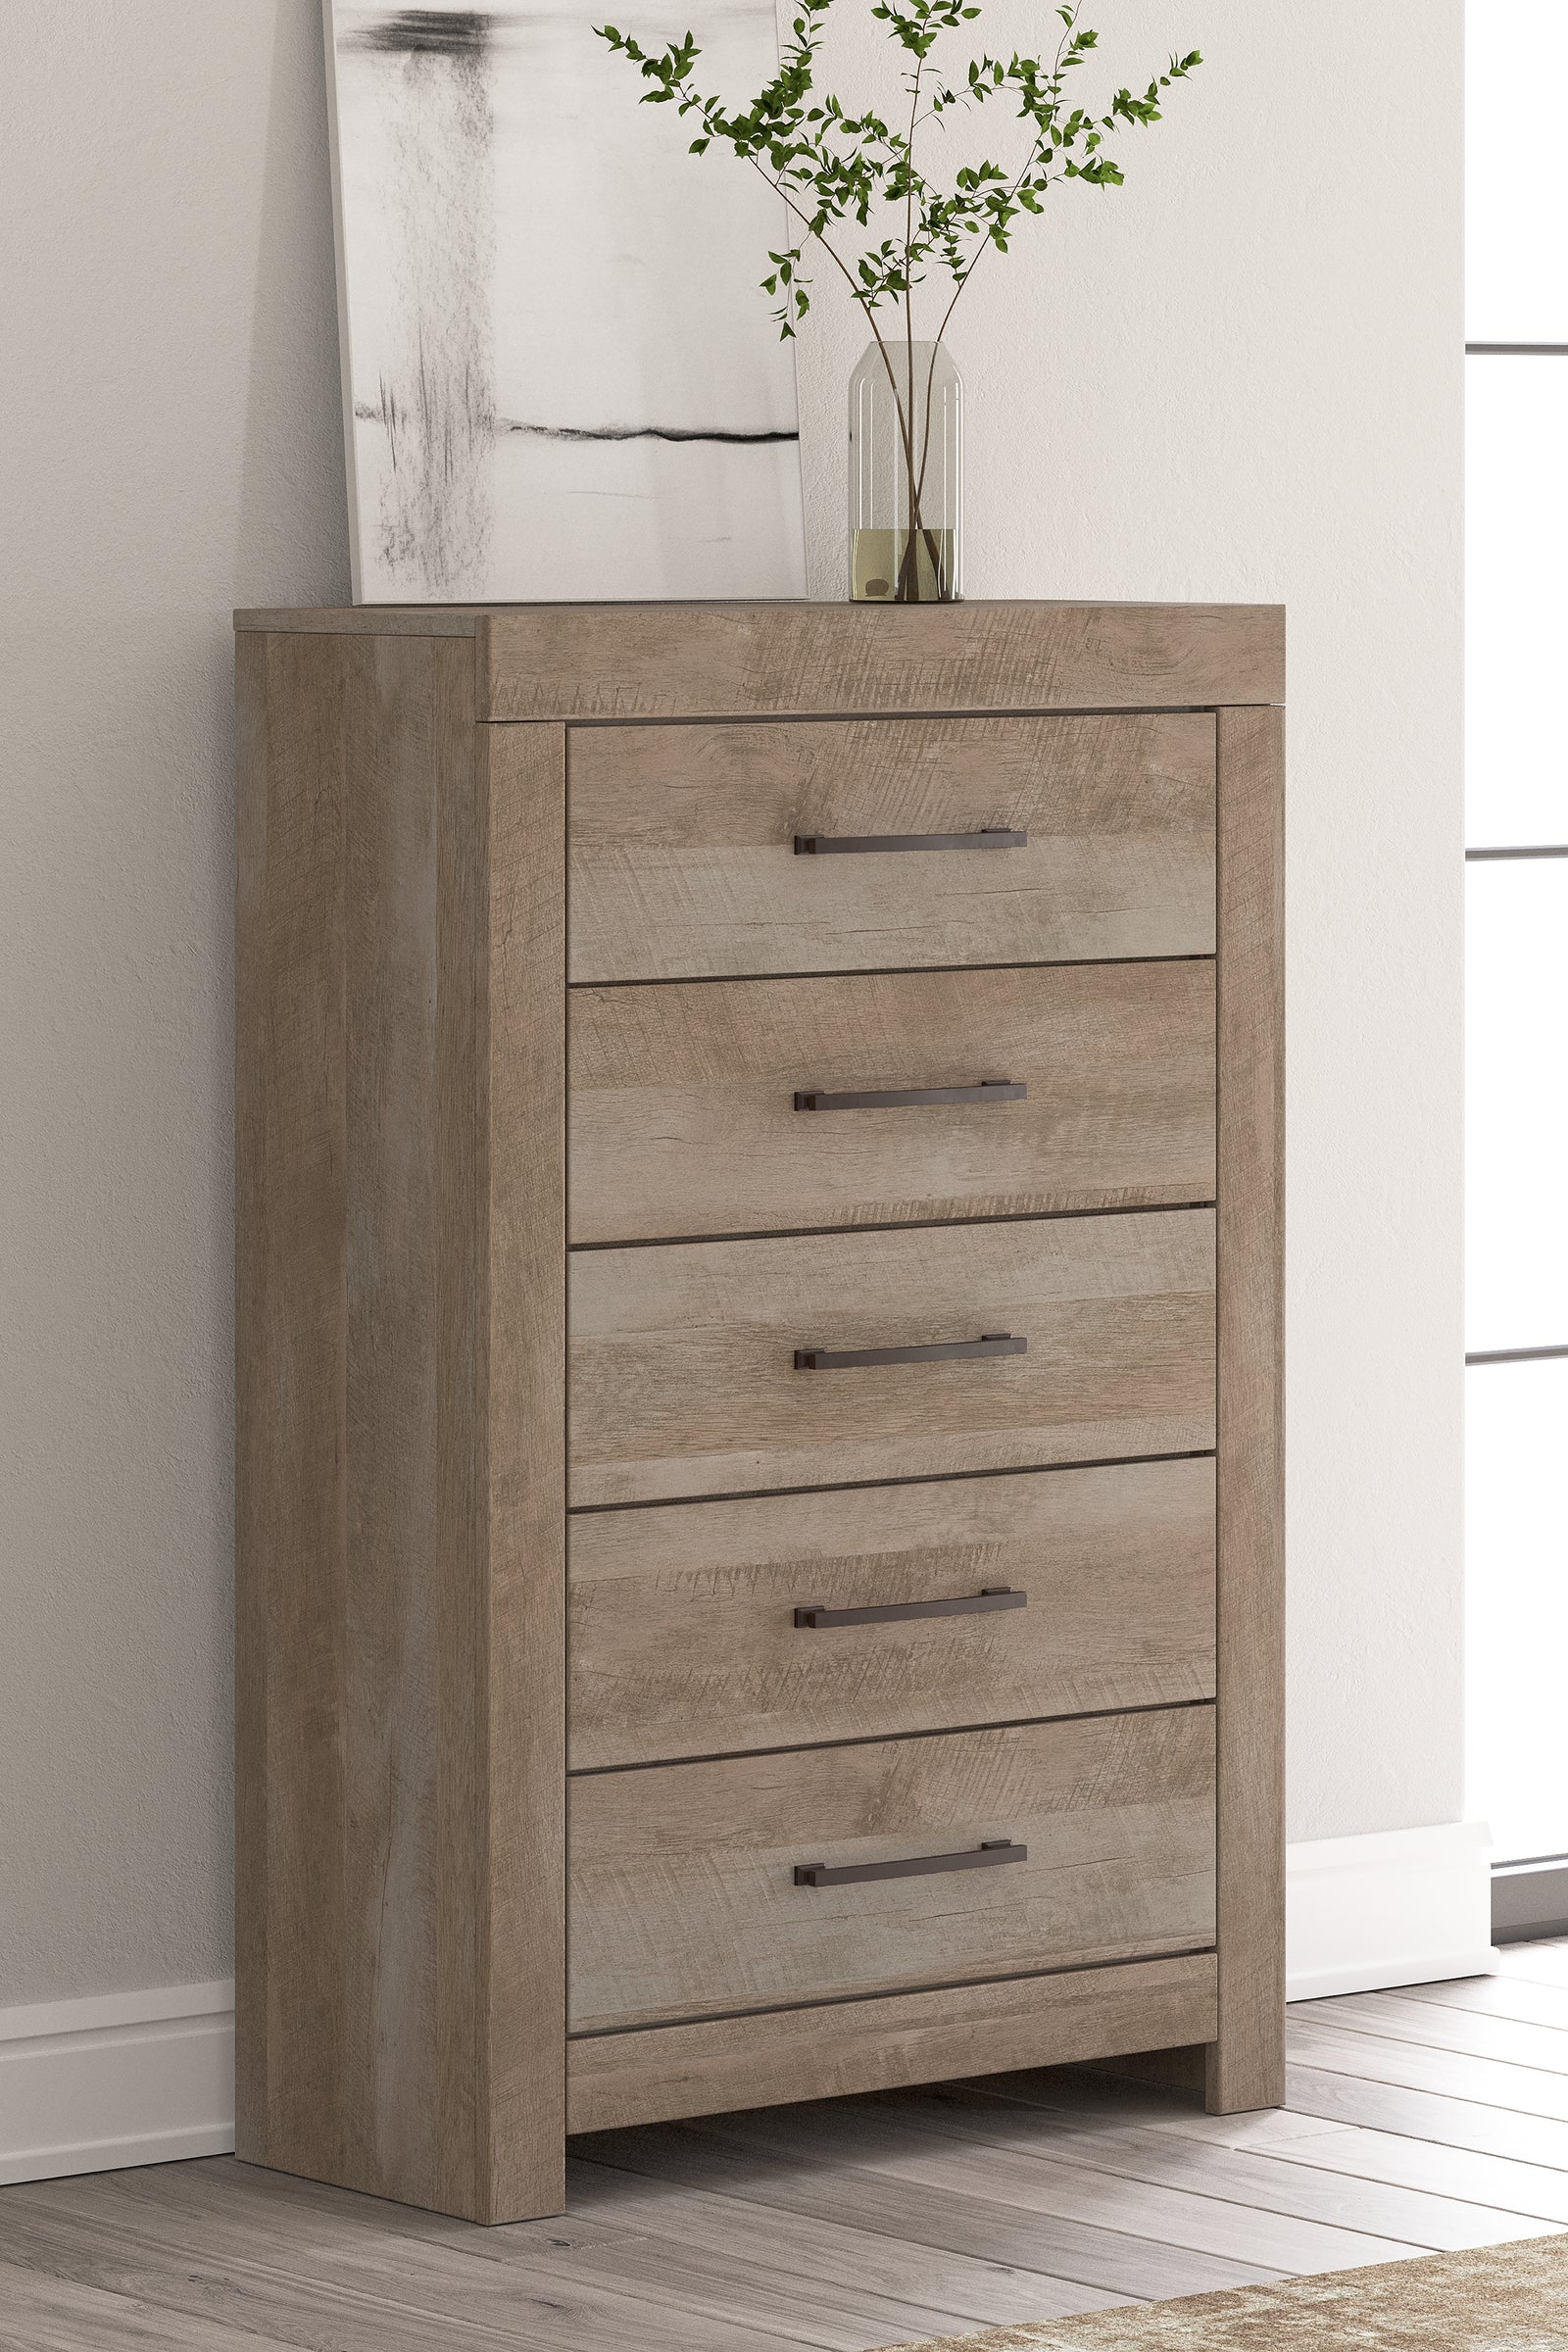 Gachester Tan Chest Of Drawers